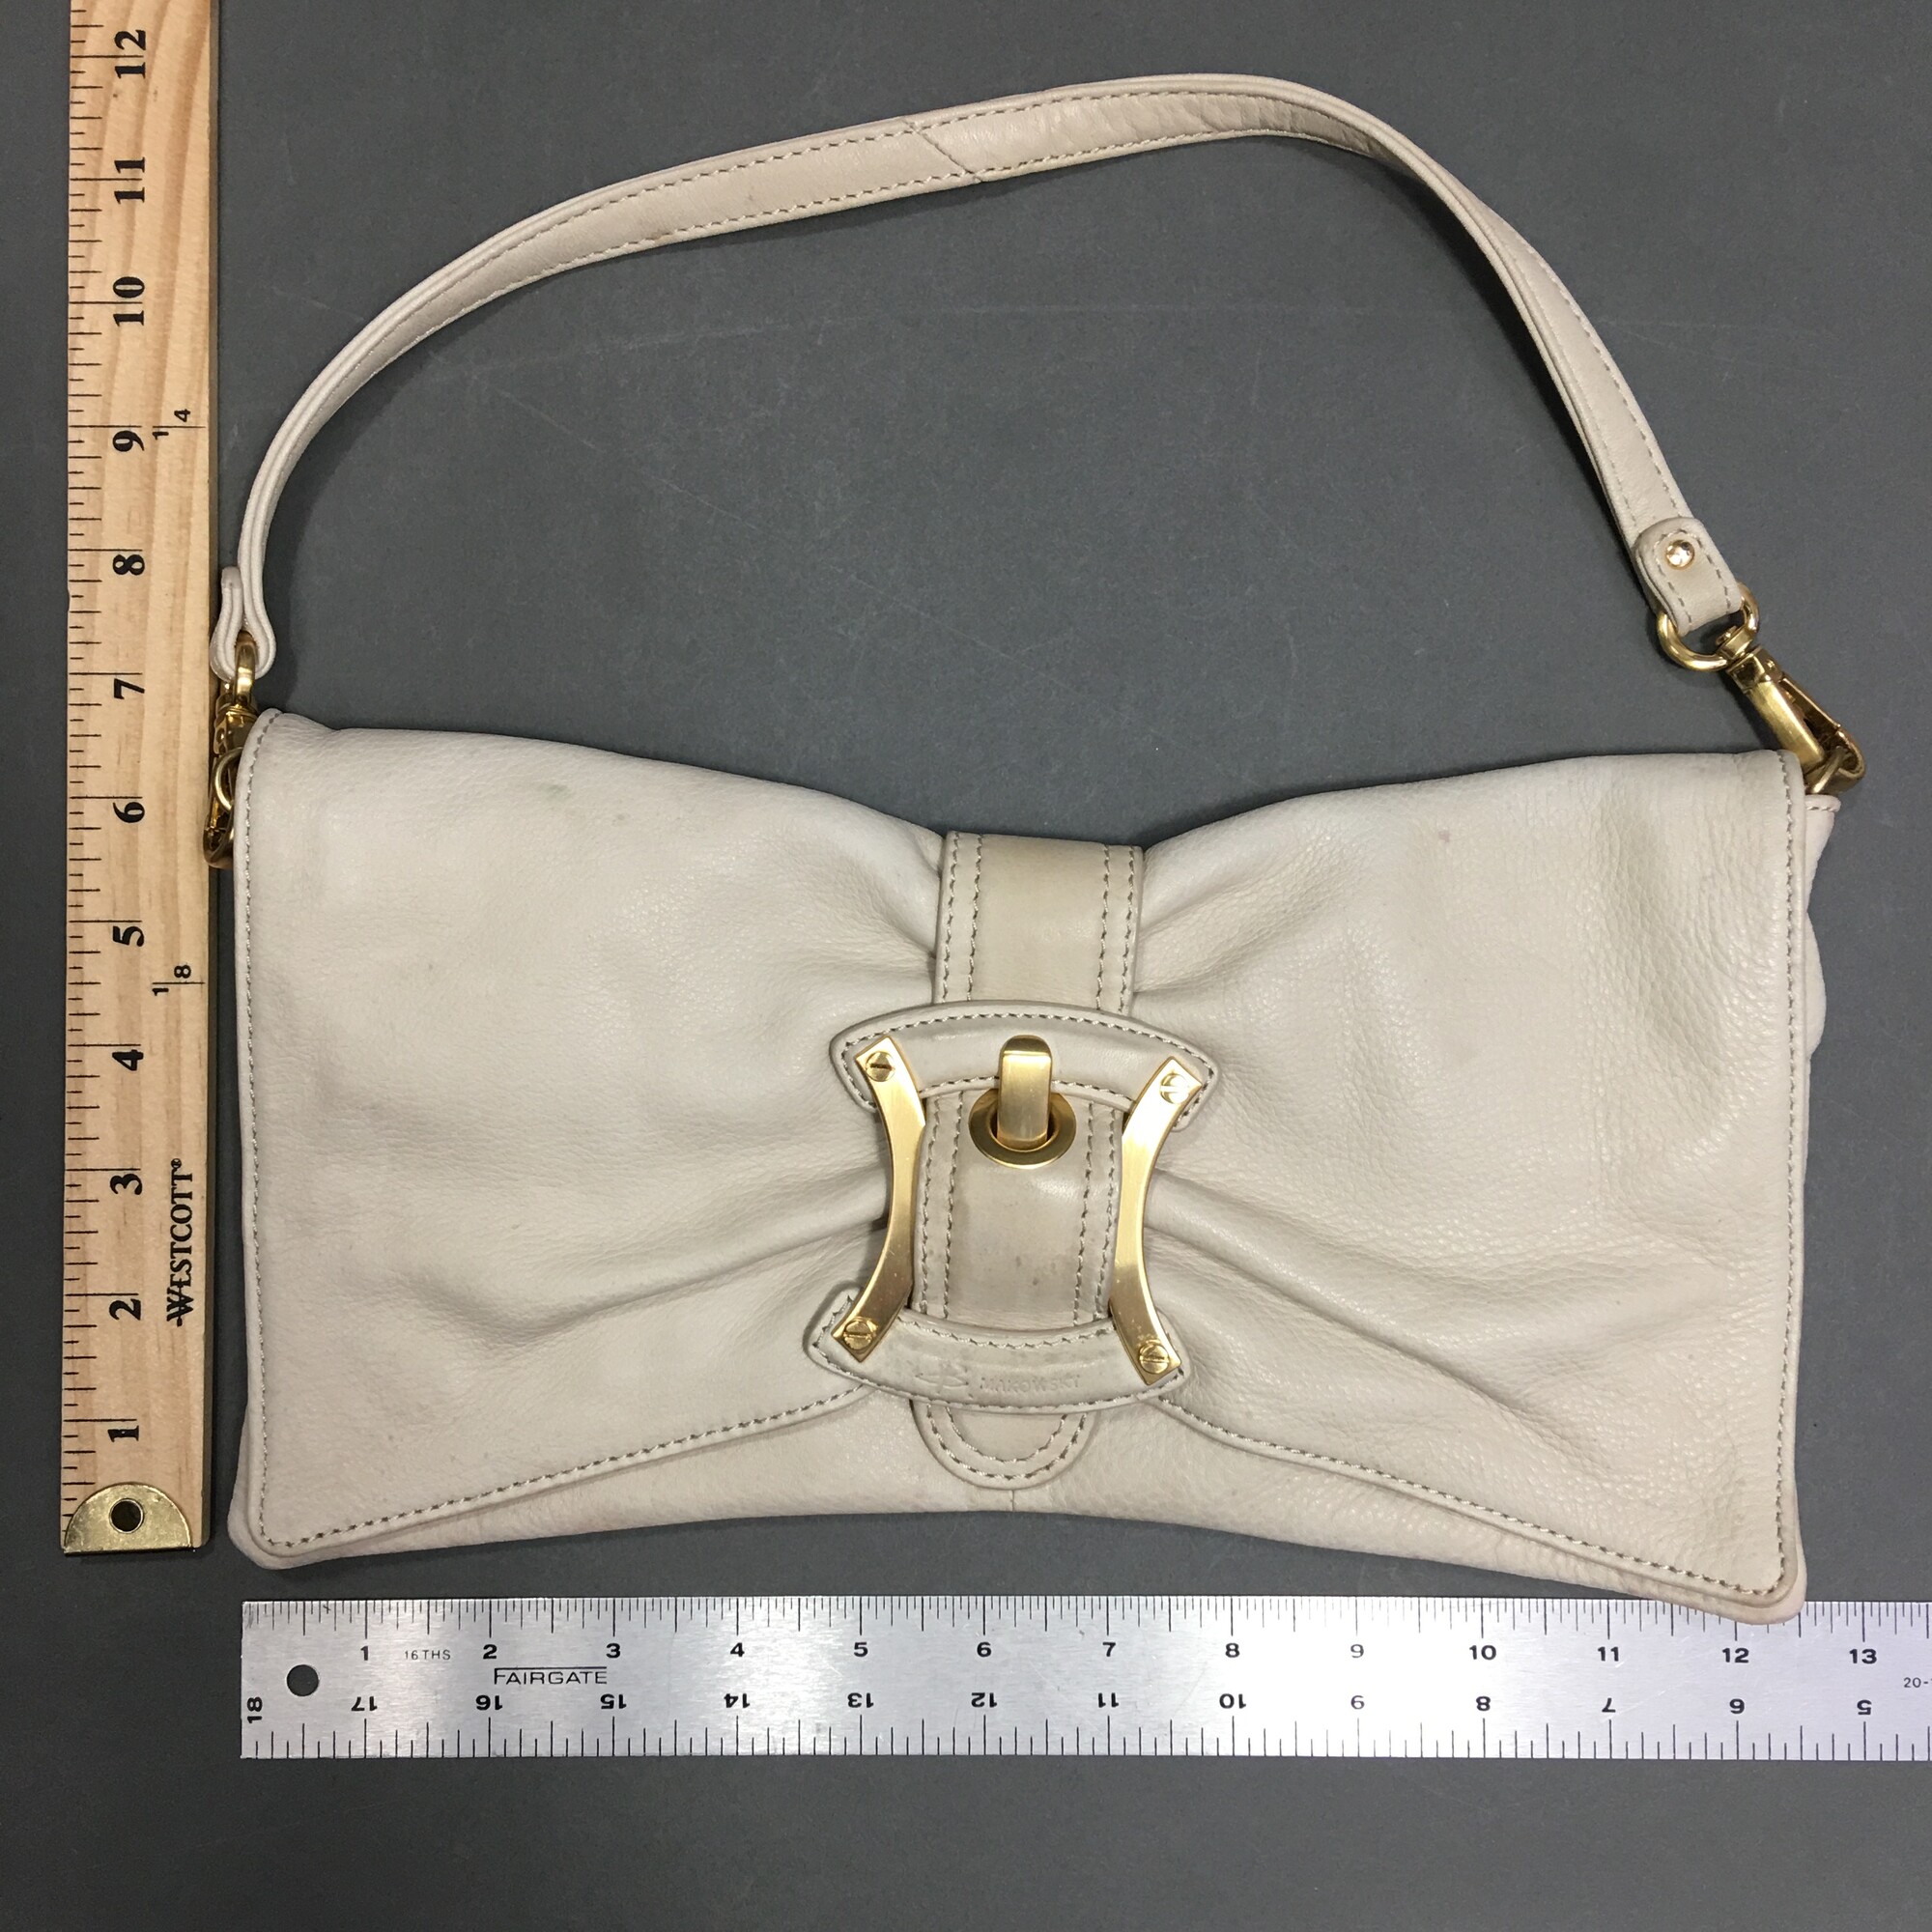 Louis Vuitton Name Tag XL Clutch, Beige, One Size